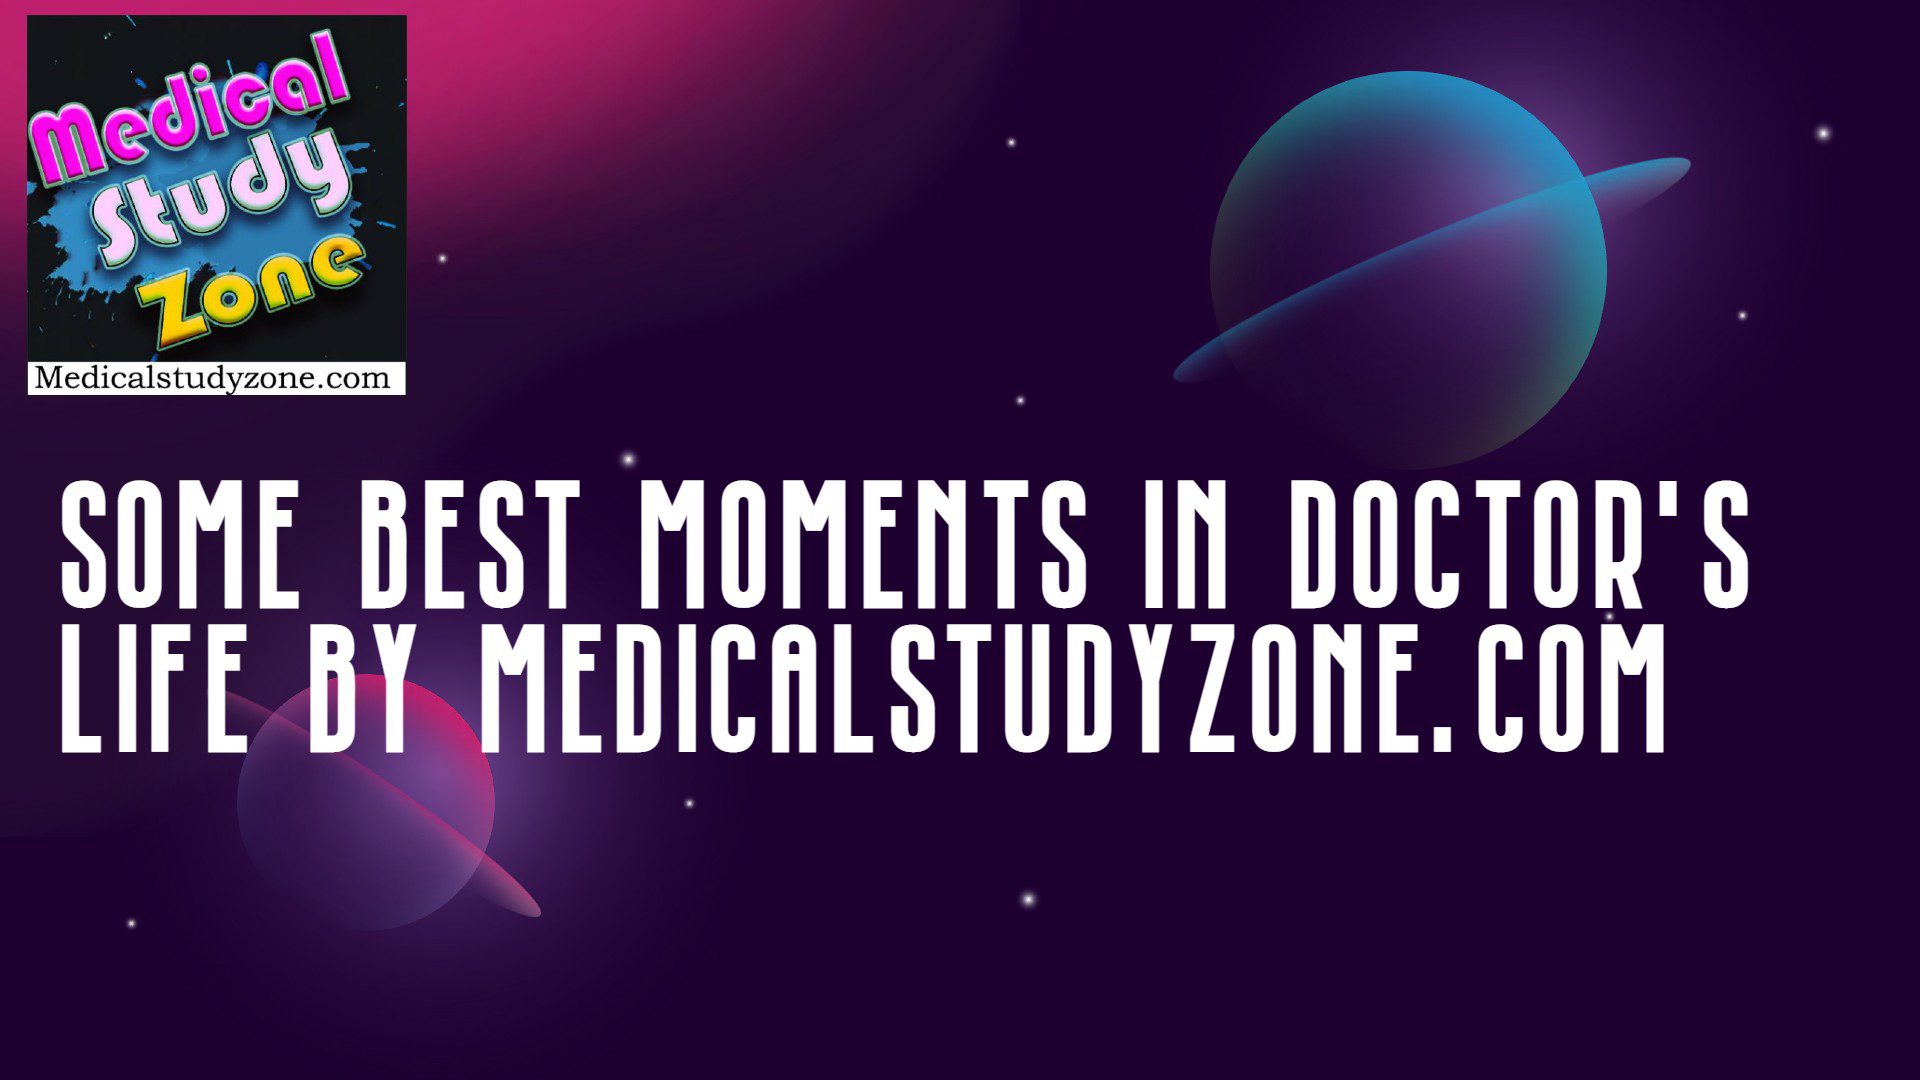 Some Best Moments in Doctor's Life